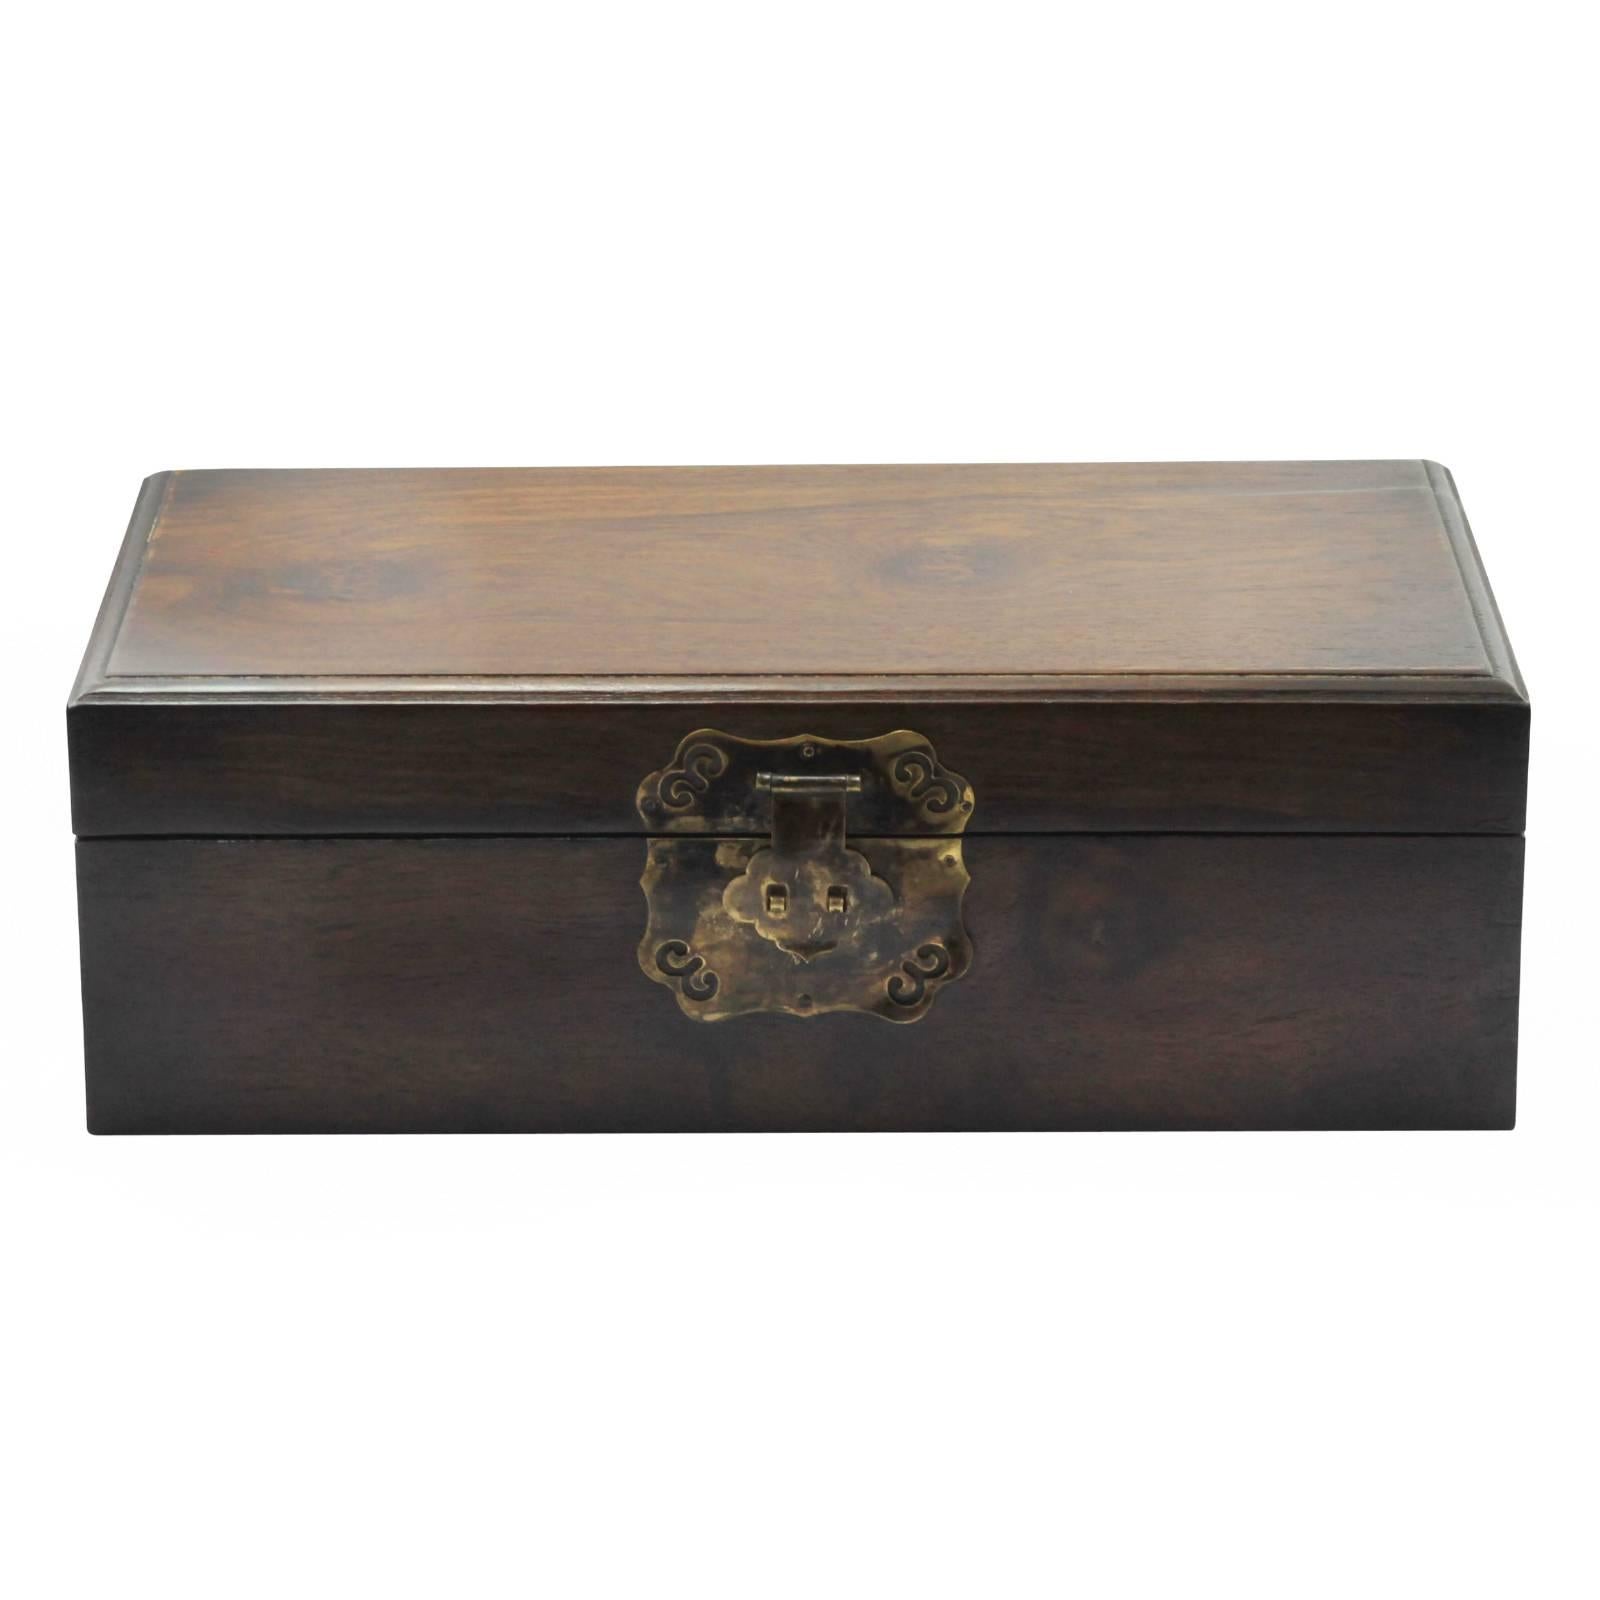 A late 19th century Qing Dynasty document box, made from solid huanghuali wood, with brass mounts and handles. 